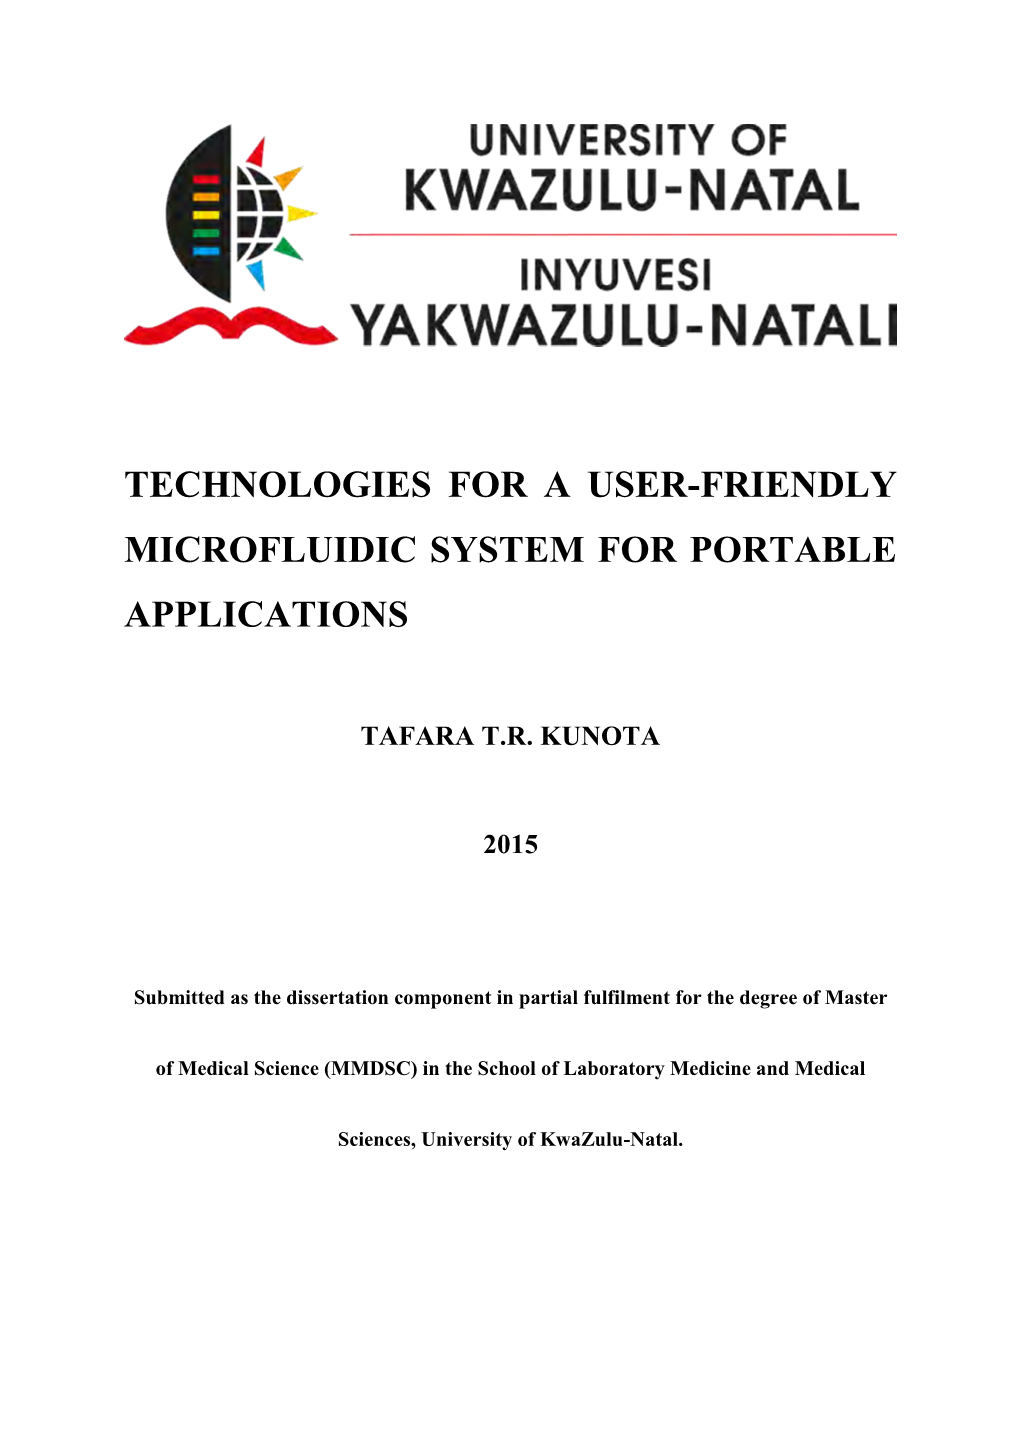 Technologies for a User-Friendly Microfluidic System for Portable Applications